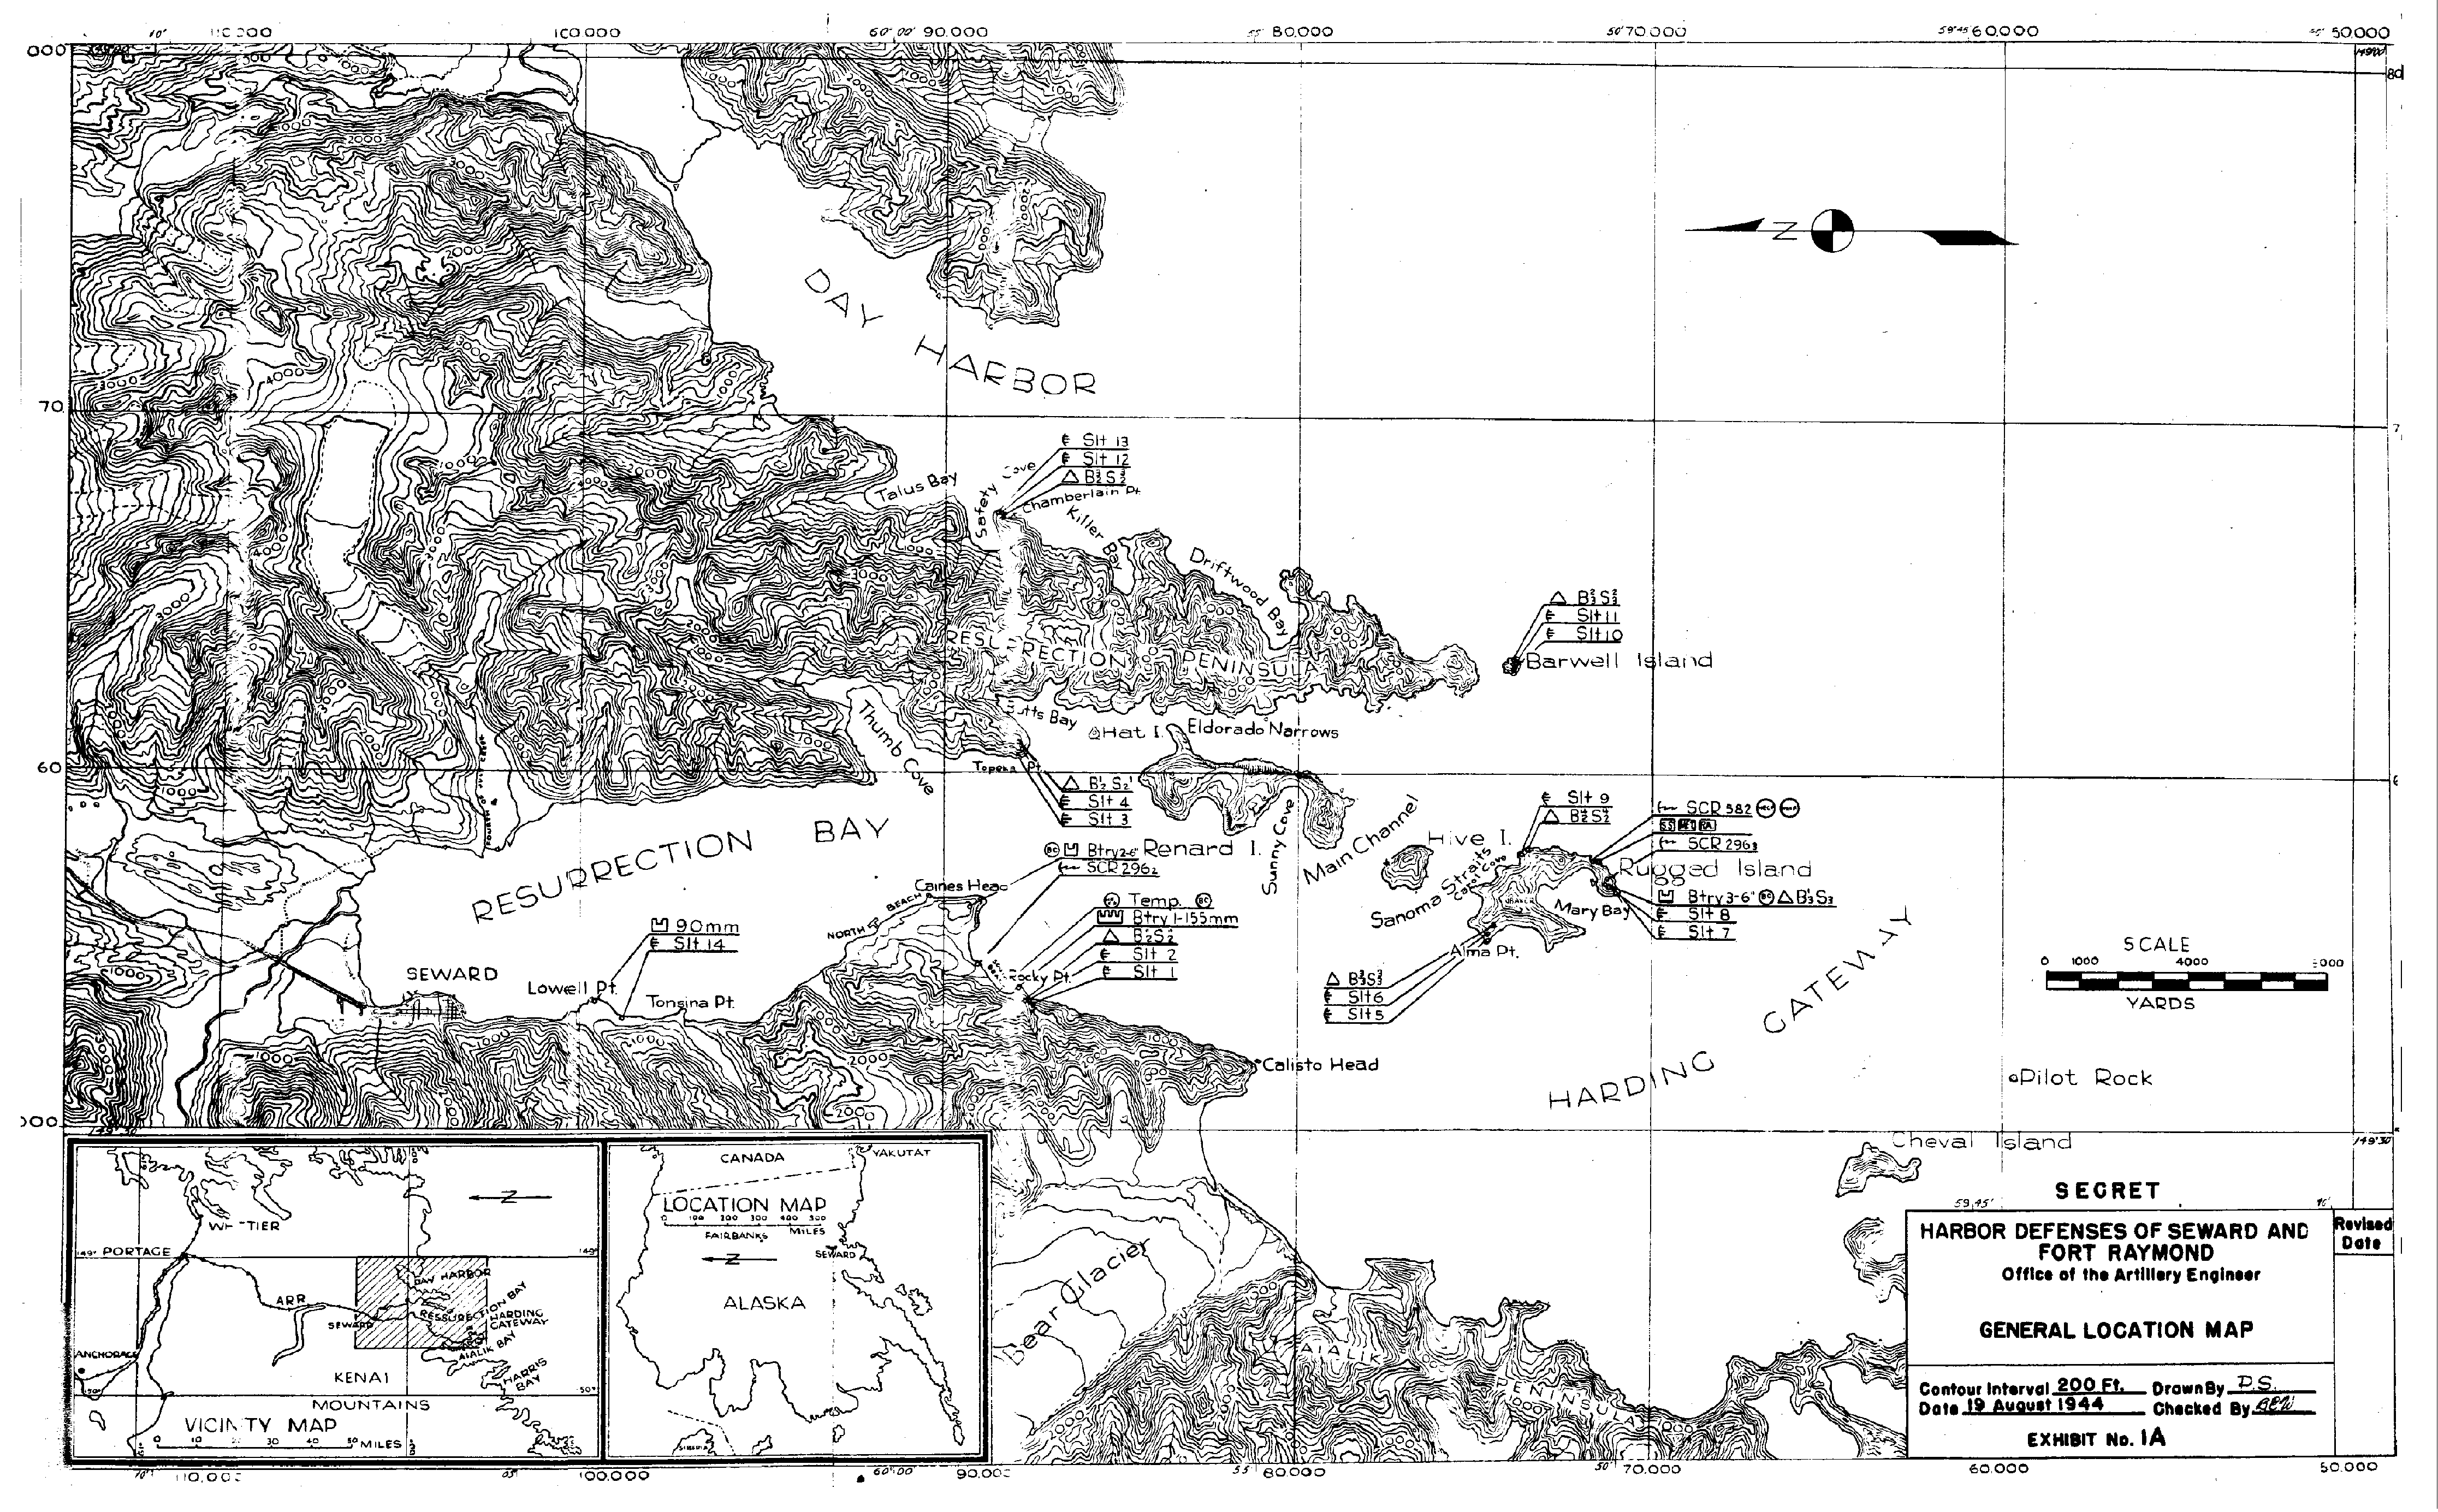 Harbor Defenses of Seward and Fort Raymond, General Location Map, 1944. U.S. Army Corps of Engineers